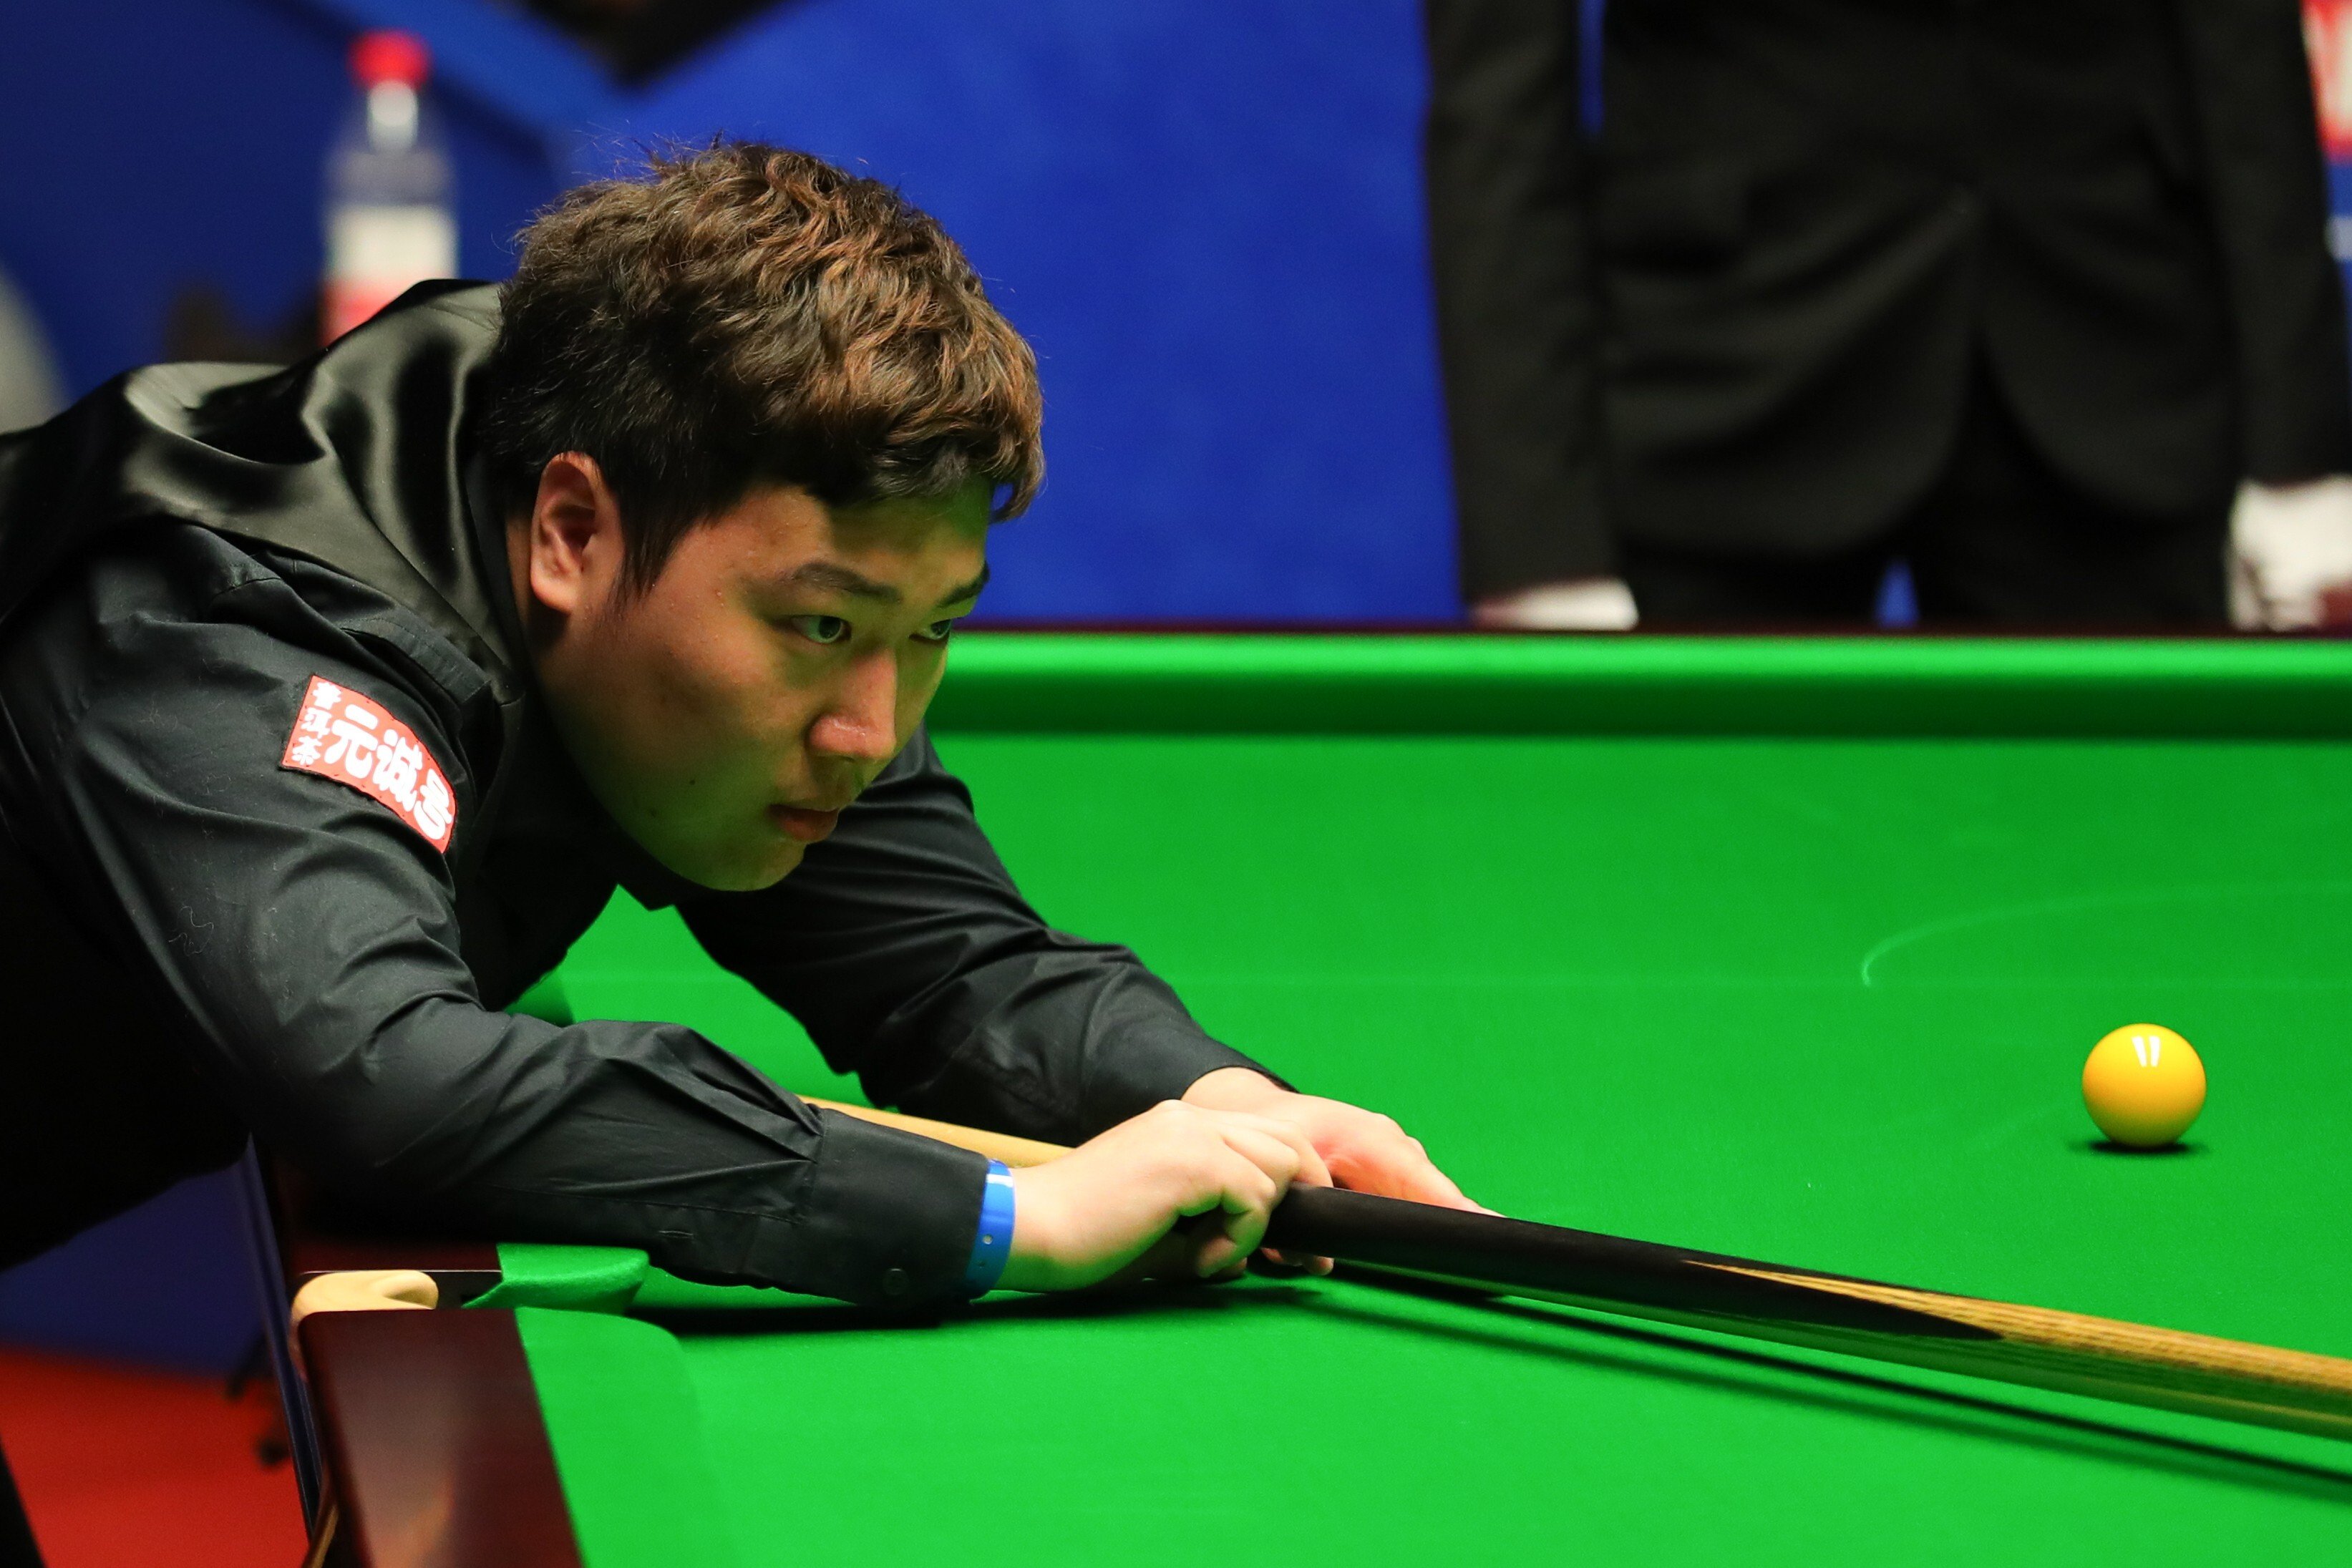 China's Yan Bingtao in action at the 2021 World Snooker Championship in Sheffield. Photo: Xinhua